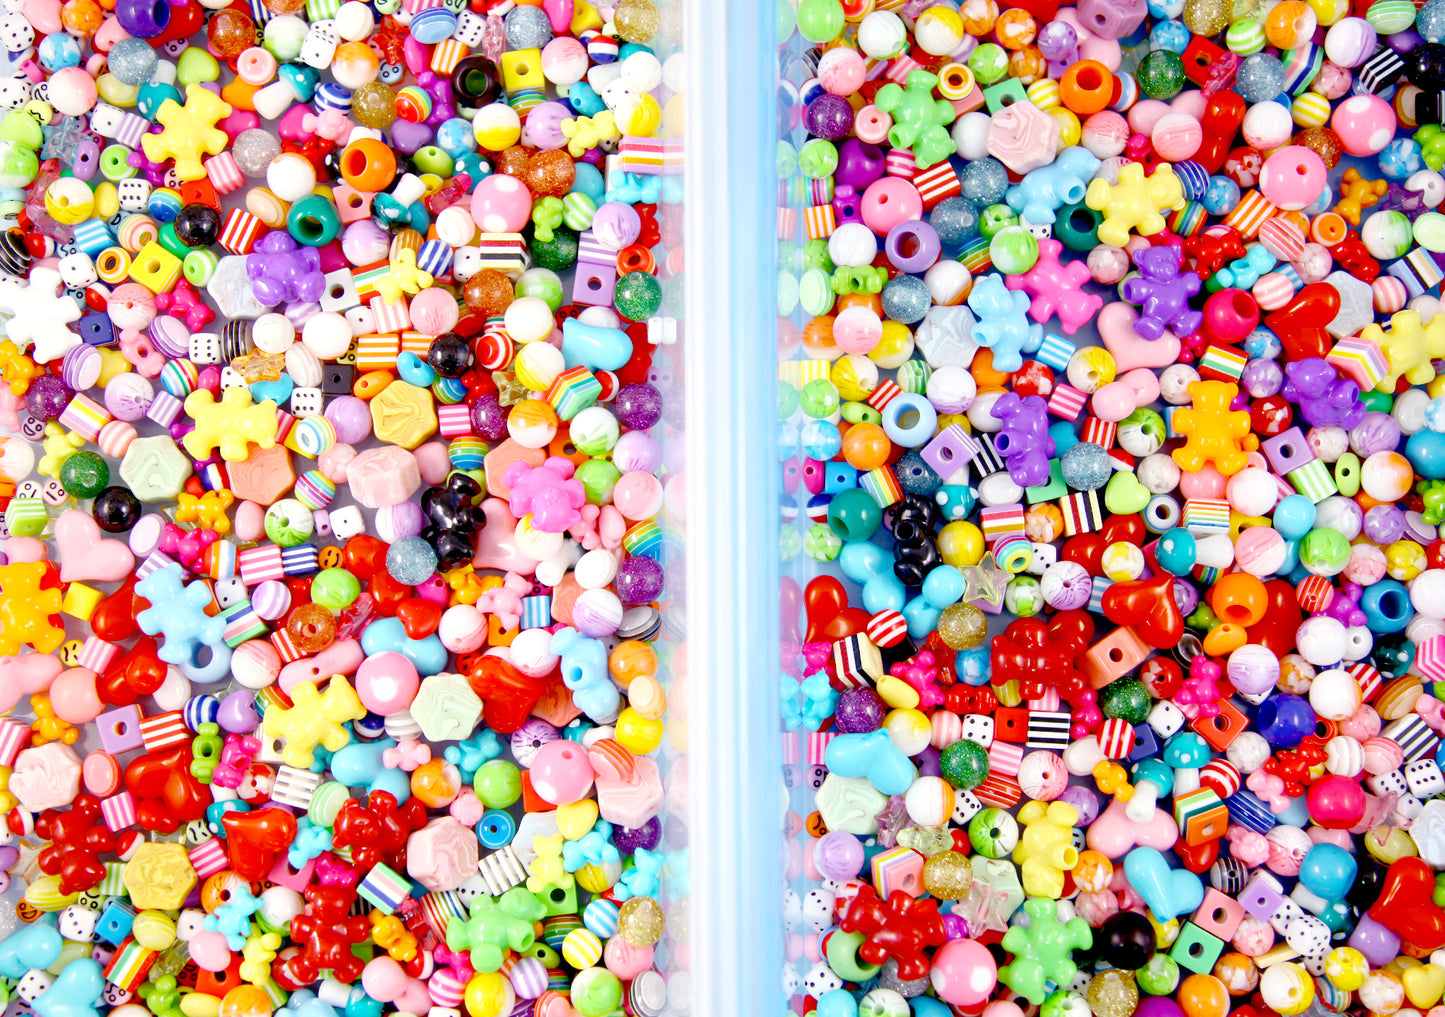 Huge Bead Grab Bag - Over 1000 pcs - SUPER FUNKY Mixed Lot of Plastic Beads - great for kandi singles, ispy, sensory crafts, jewelry making